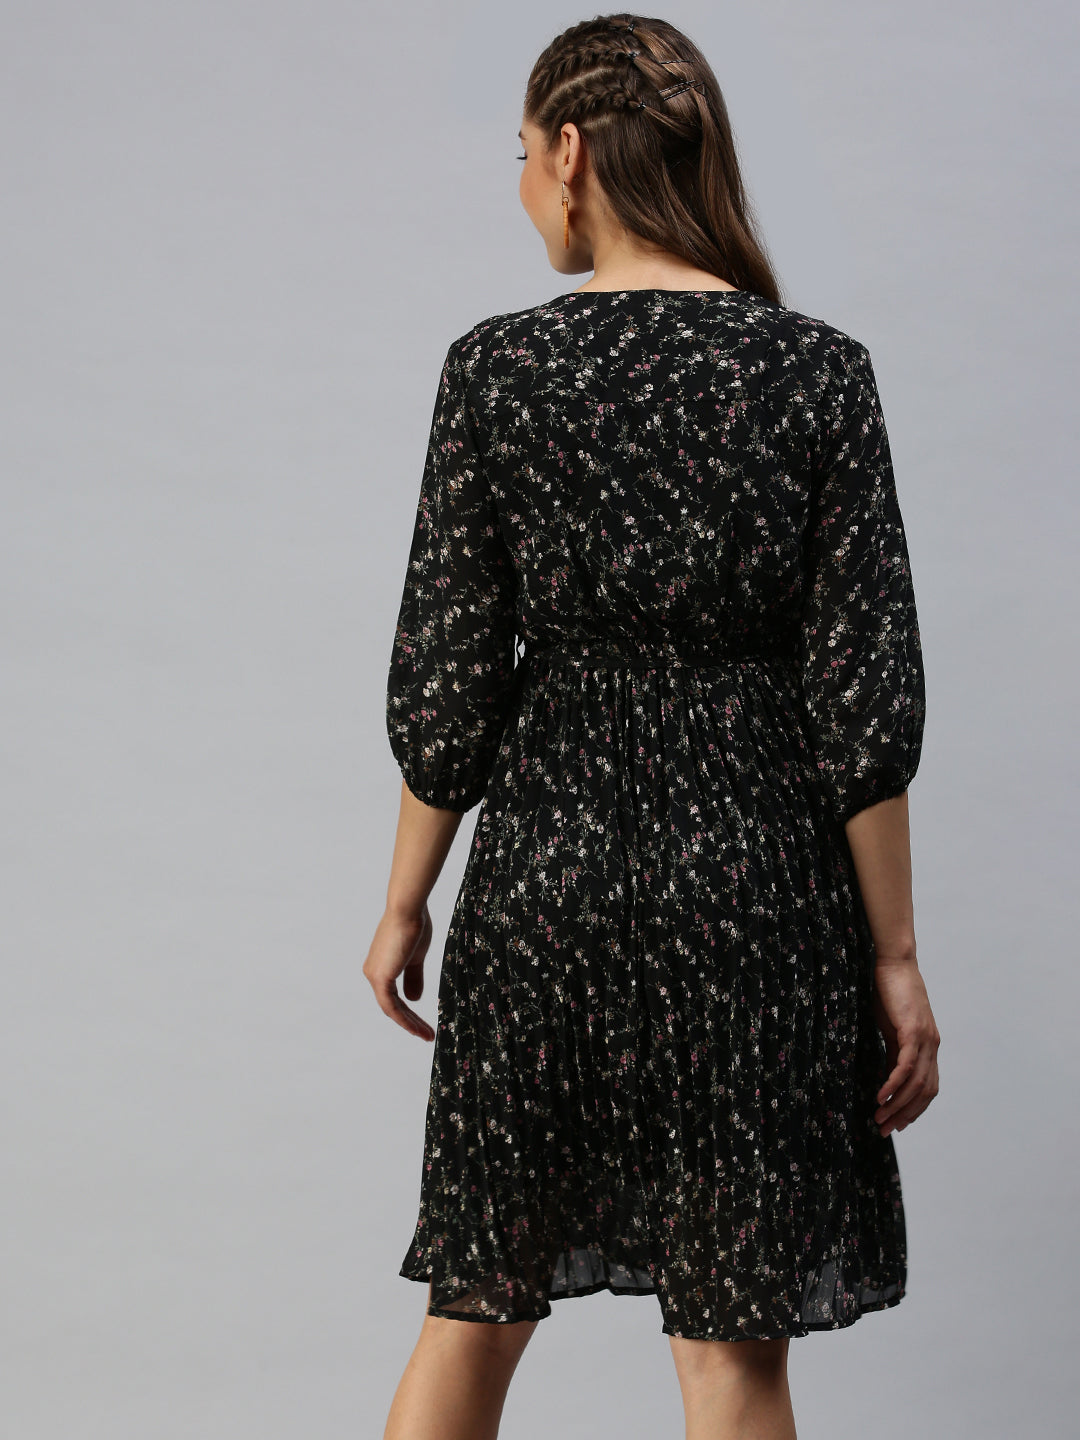 Women V-Neck Printed Fit and Flare Black Dress